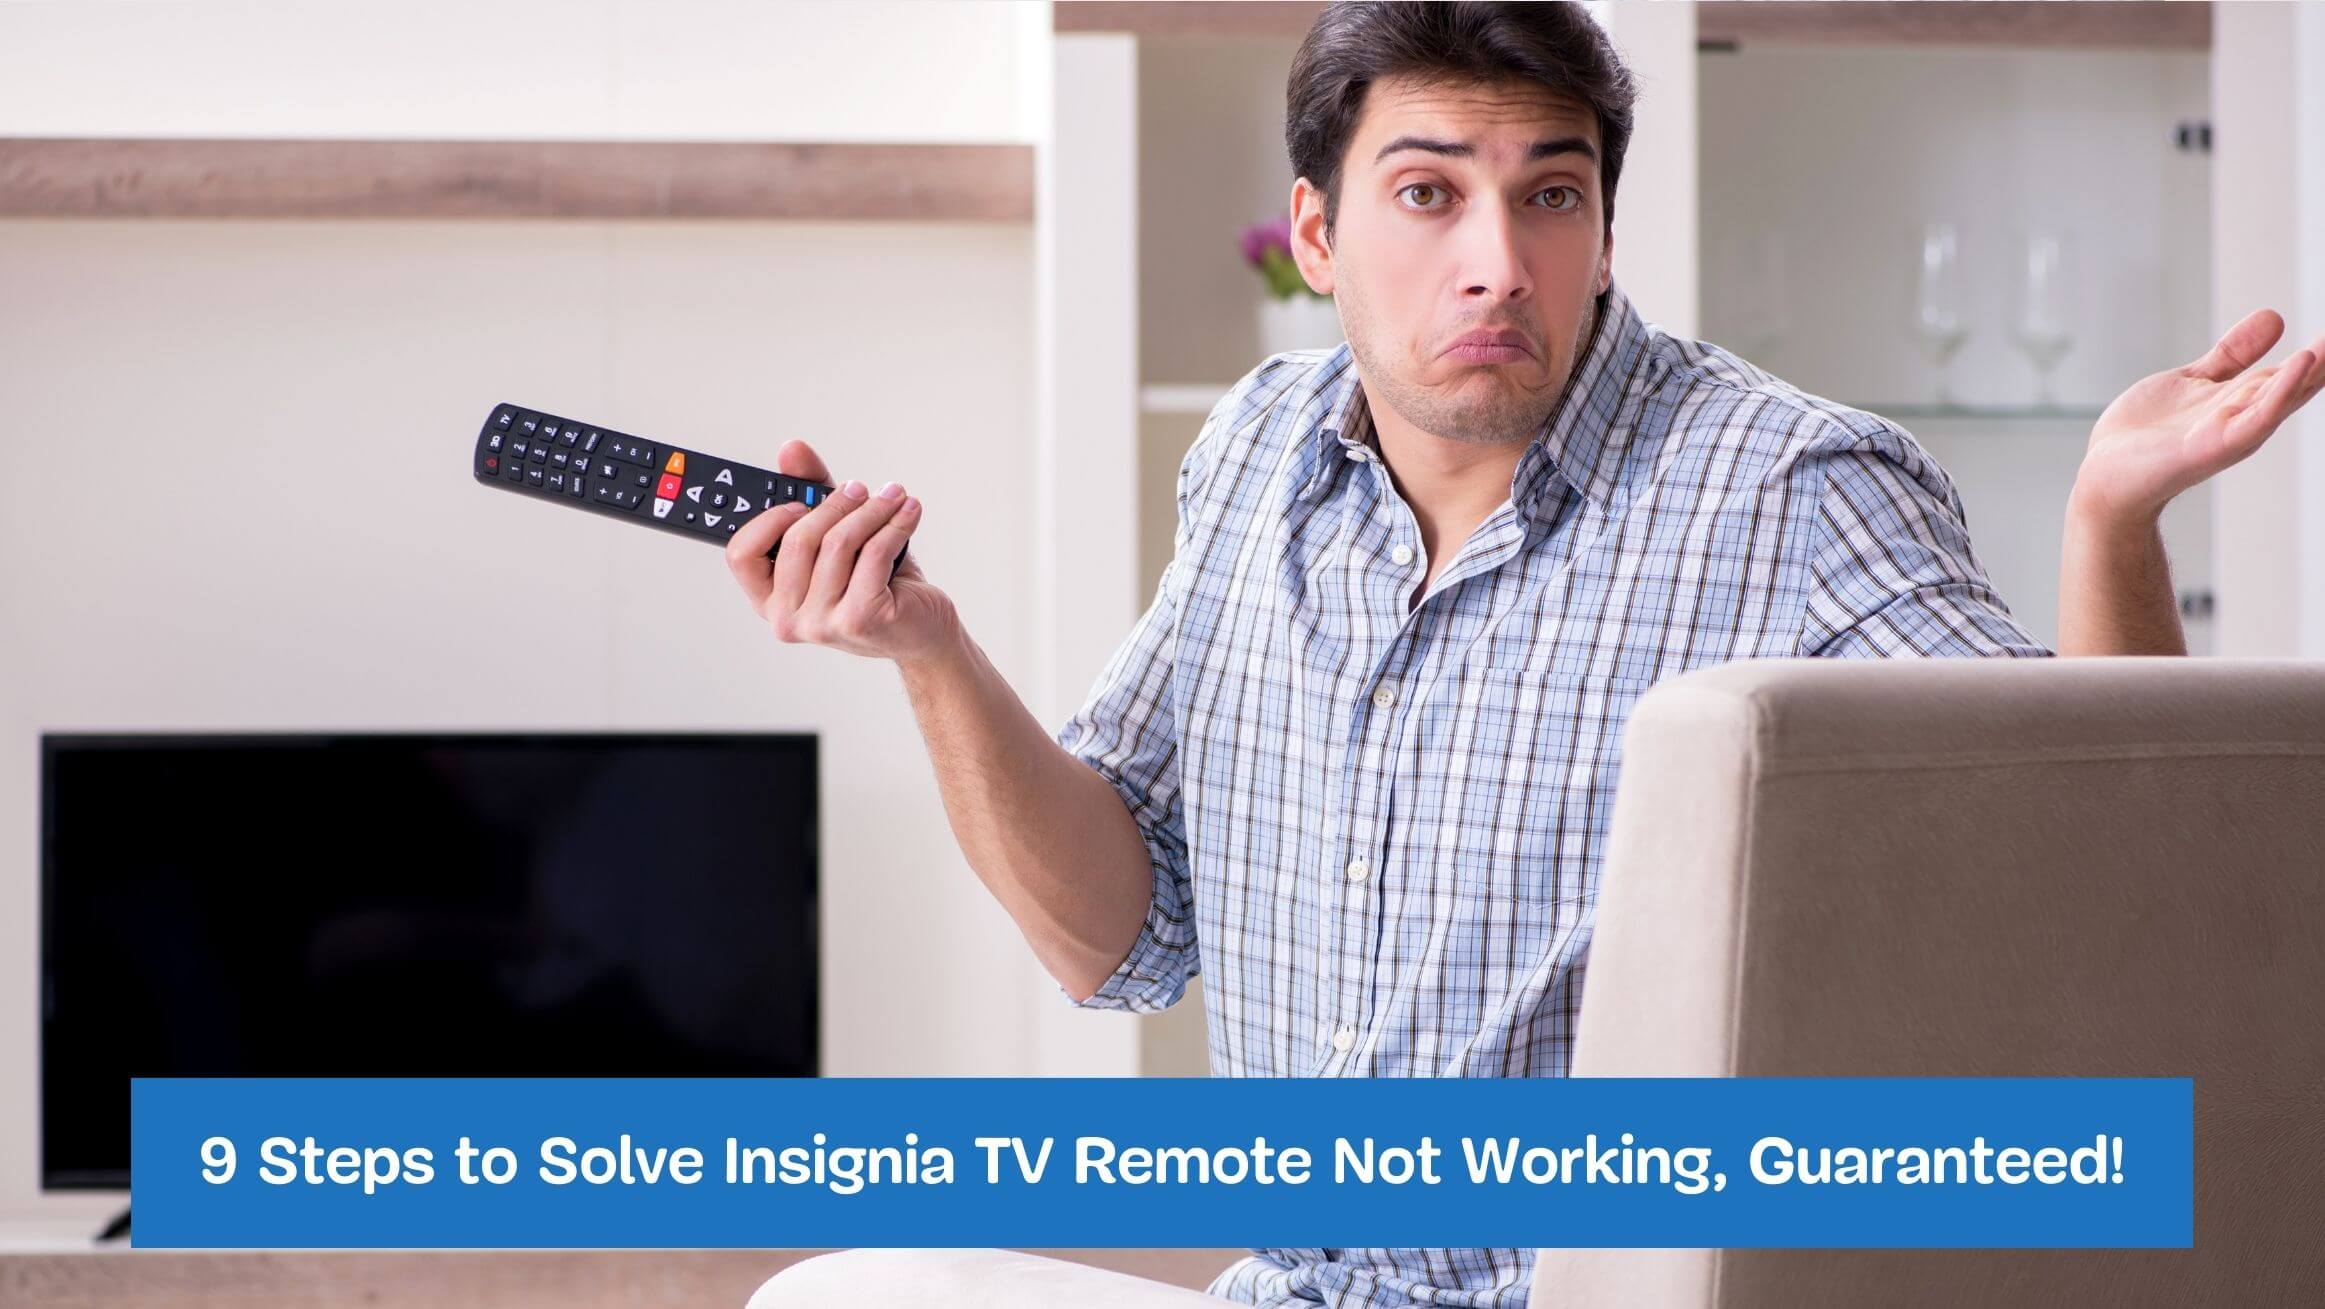 9 Steps to Solve Insignia TV Remote Not Working, Guaranteed!